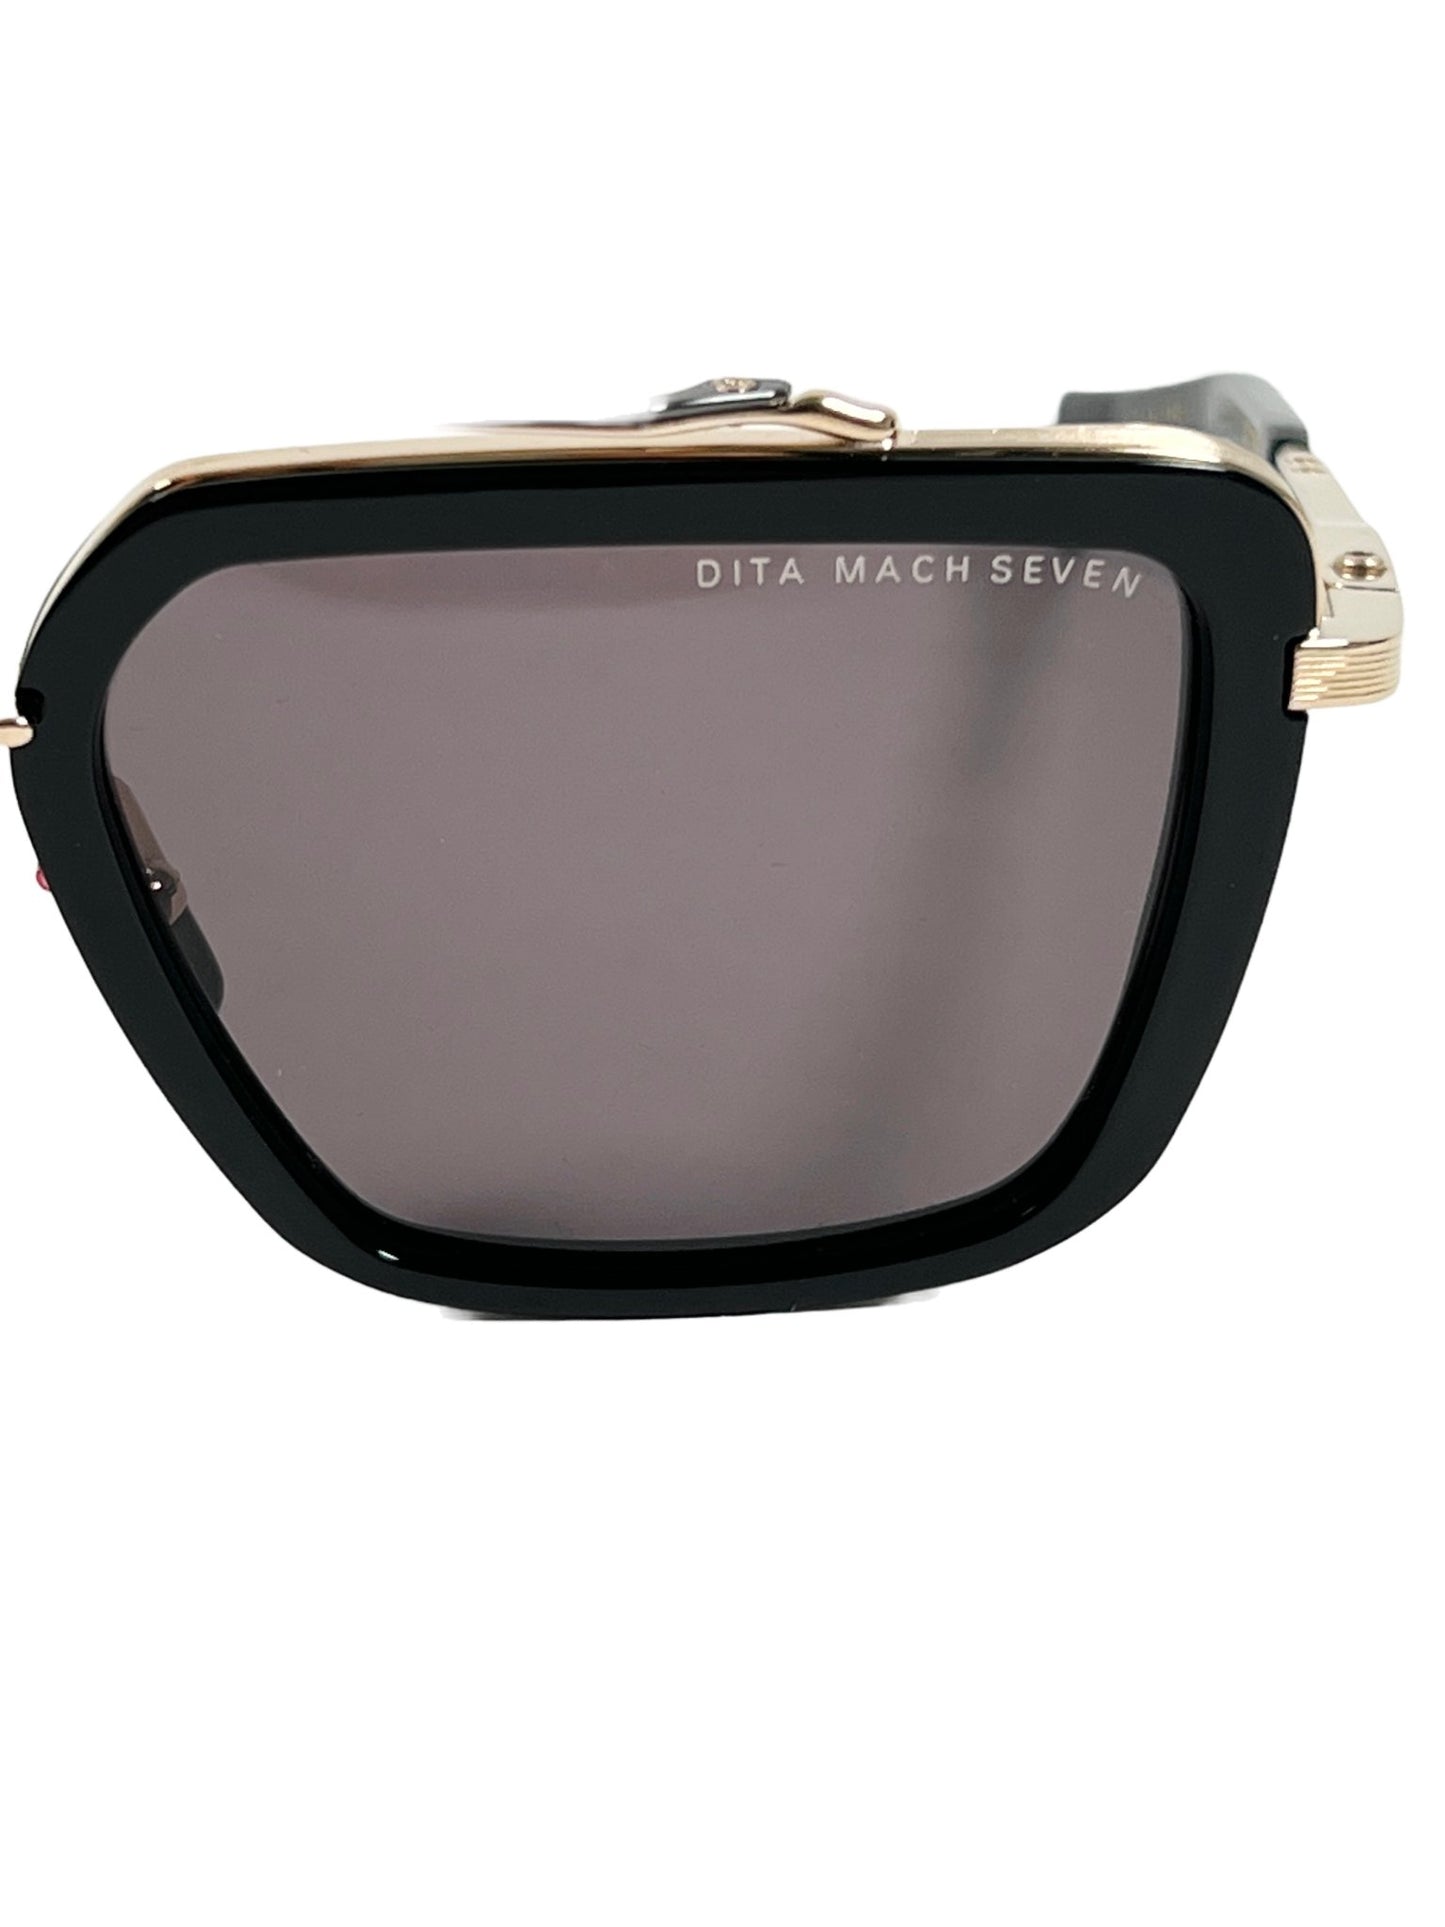 A pair of DITA Mach-Seven DTS135-56-01 sunglasses with a black frame and black/white gold accents.